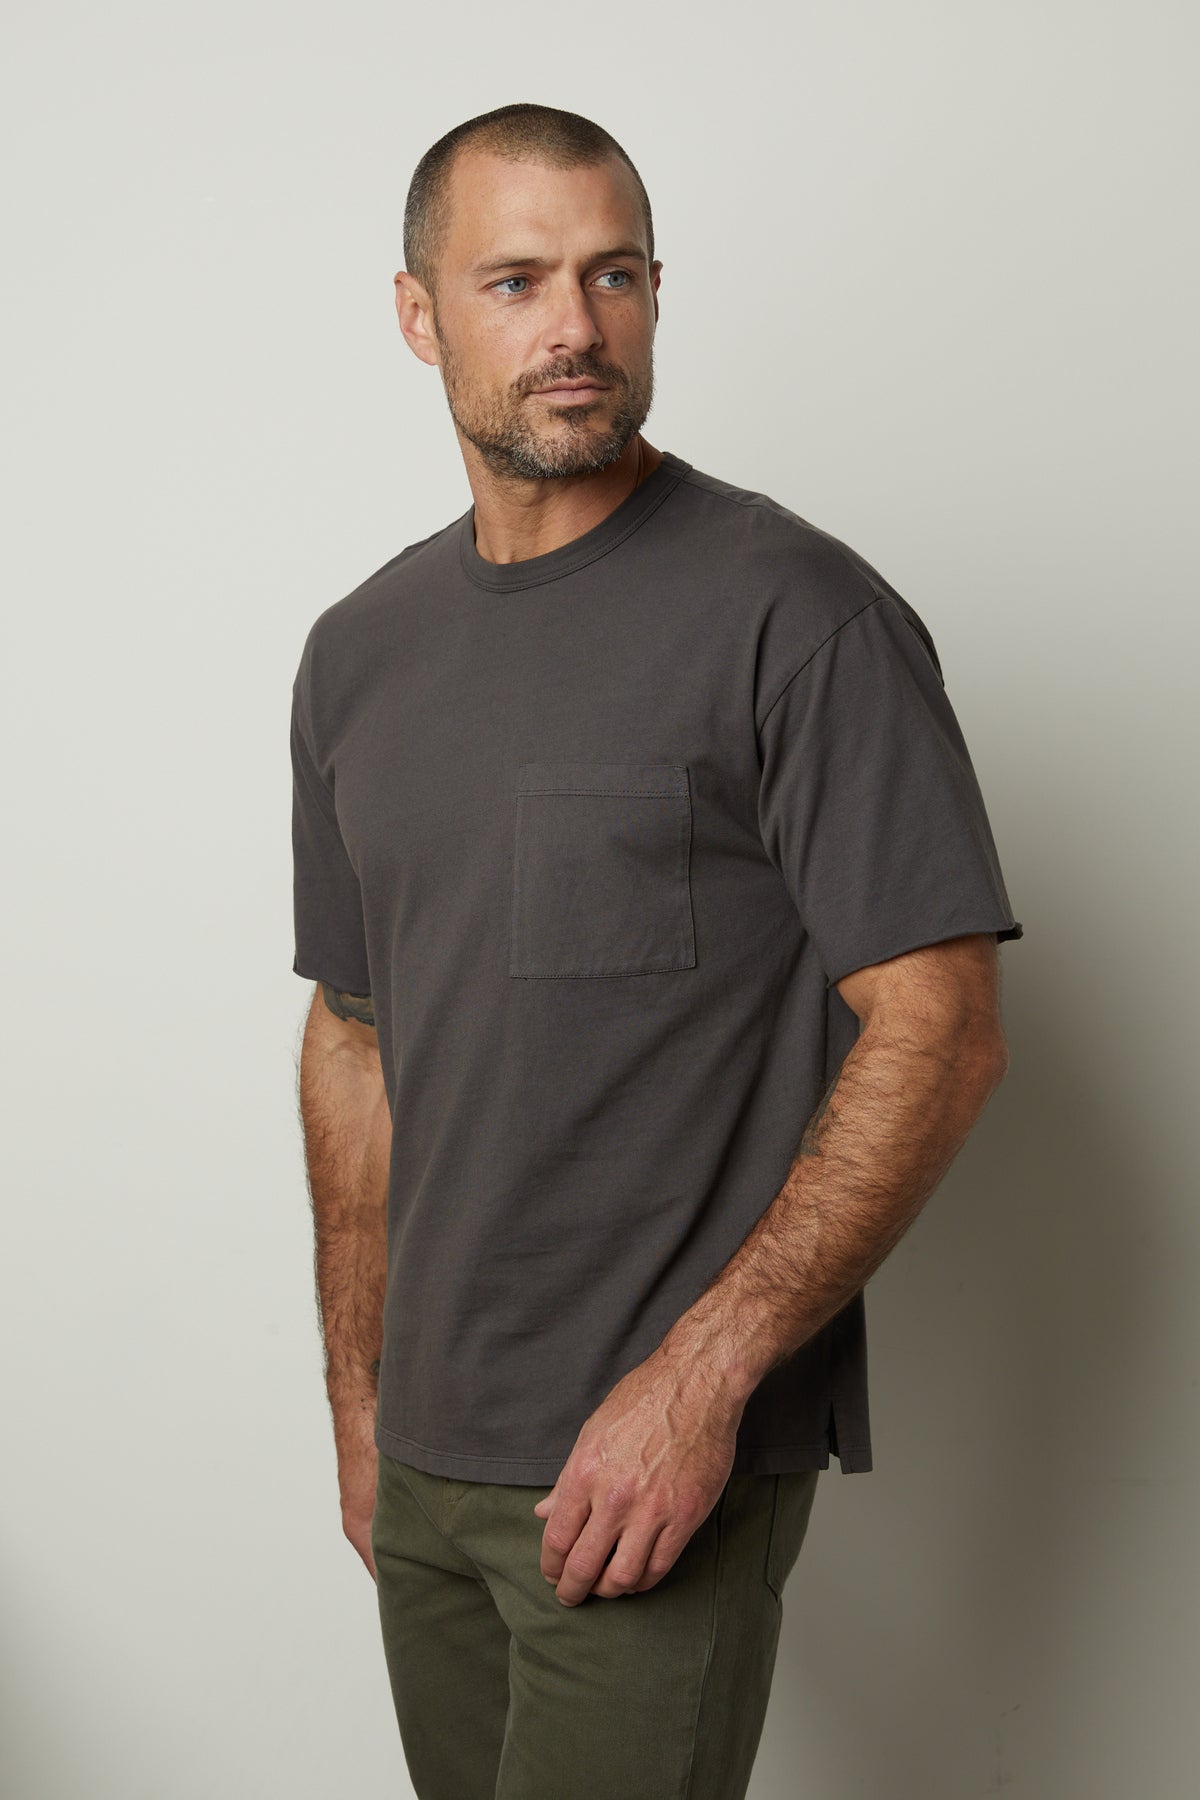   A man wearing a NEPTUNE CREW NECK POCKET TEE by Velvet by Graham & Spencer and green pants. 